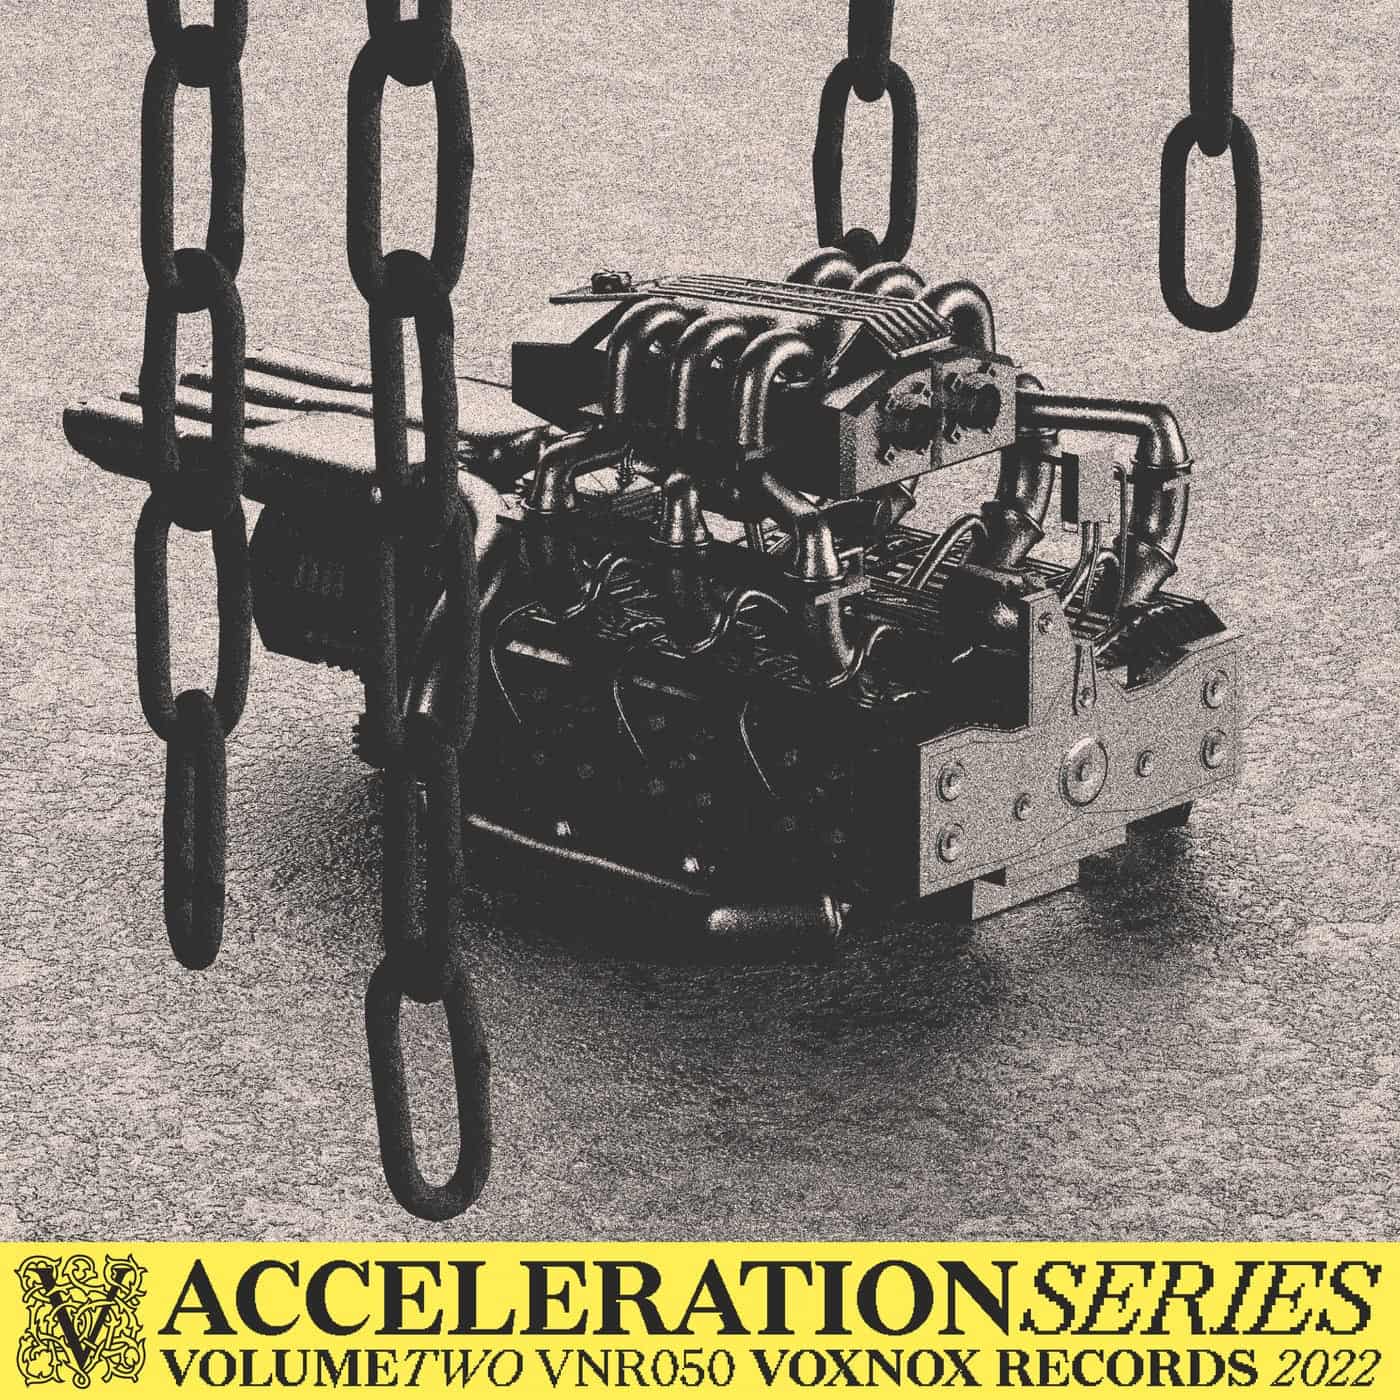 Download VA - Acceleration Series Vol. II on Electrobuzz